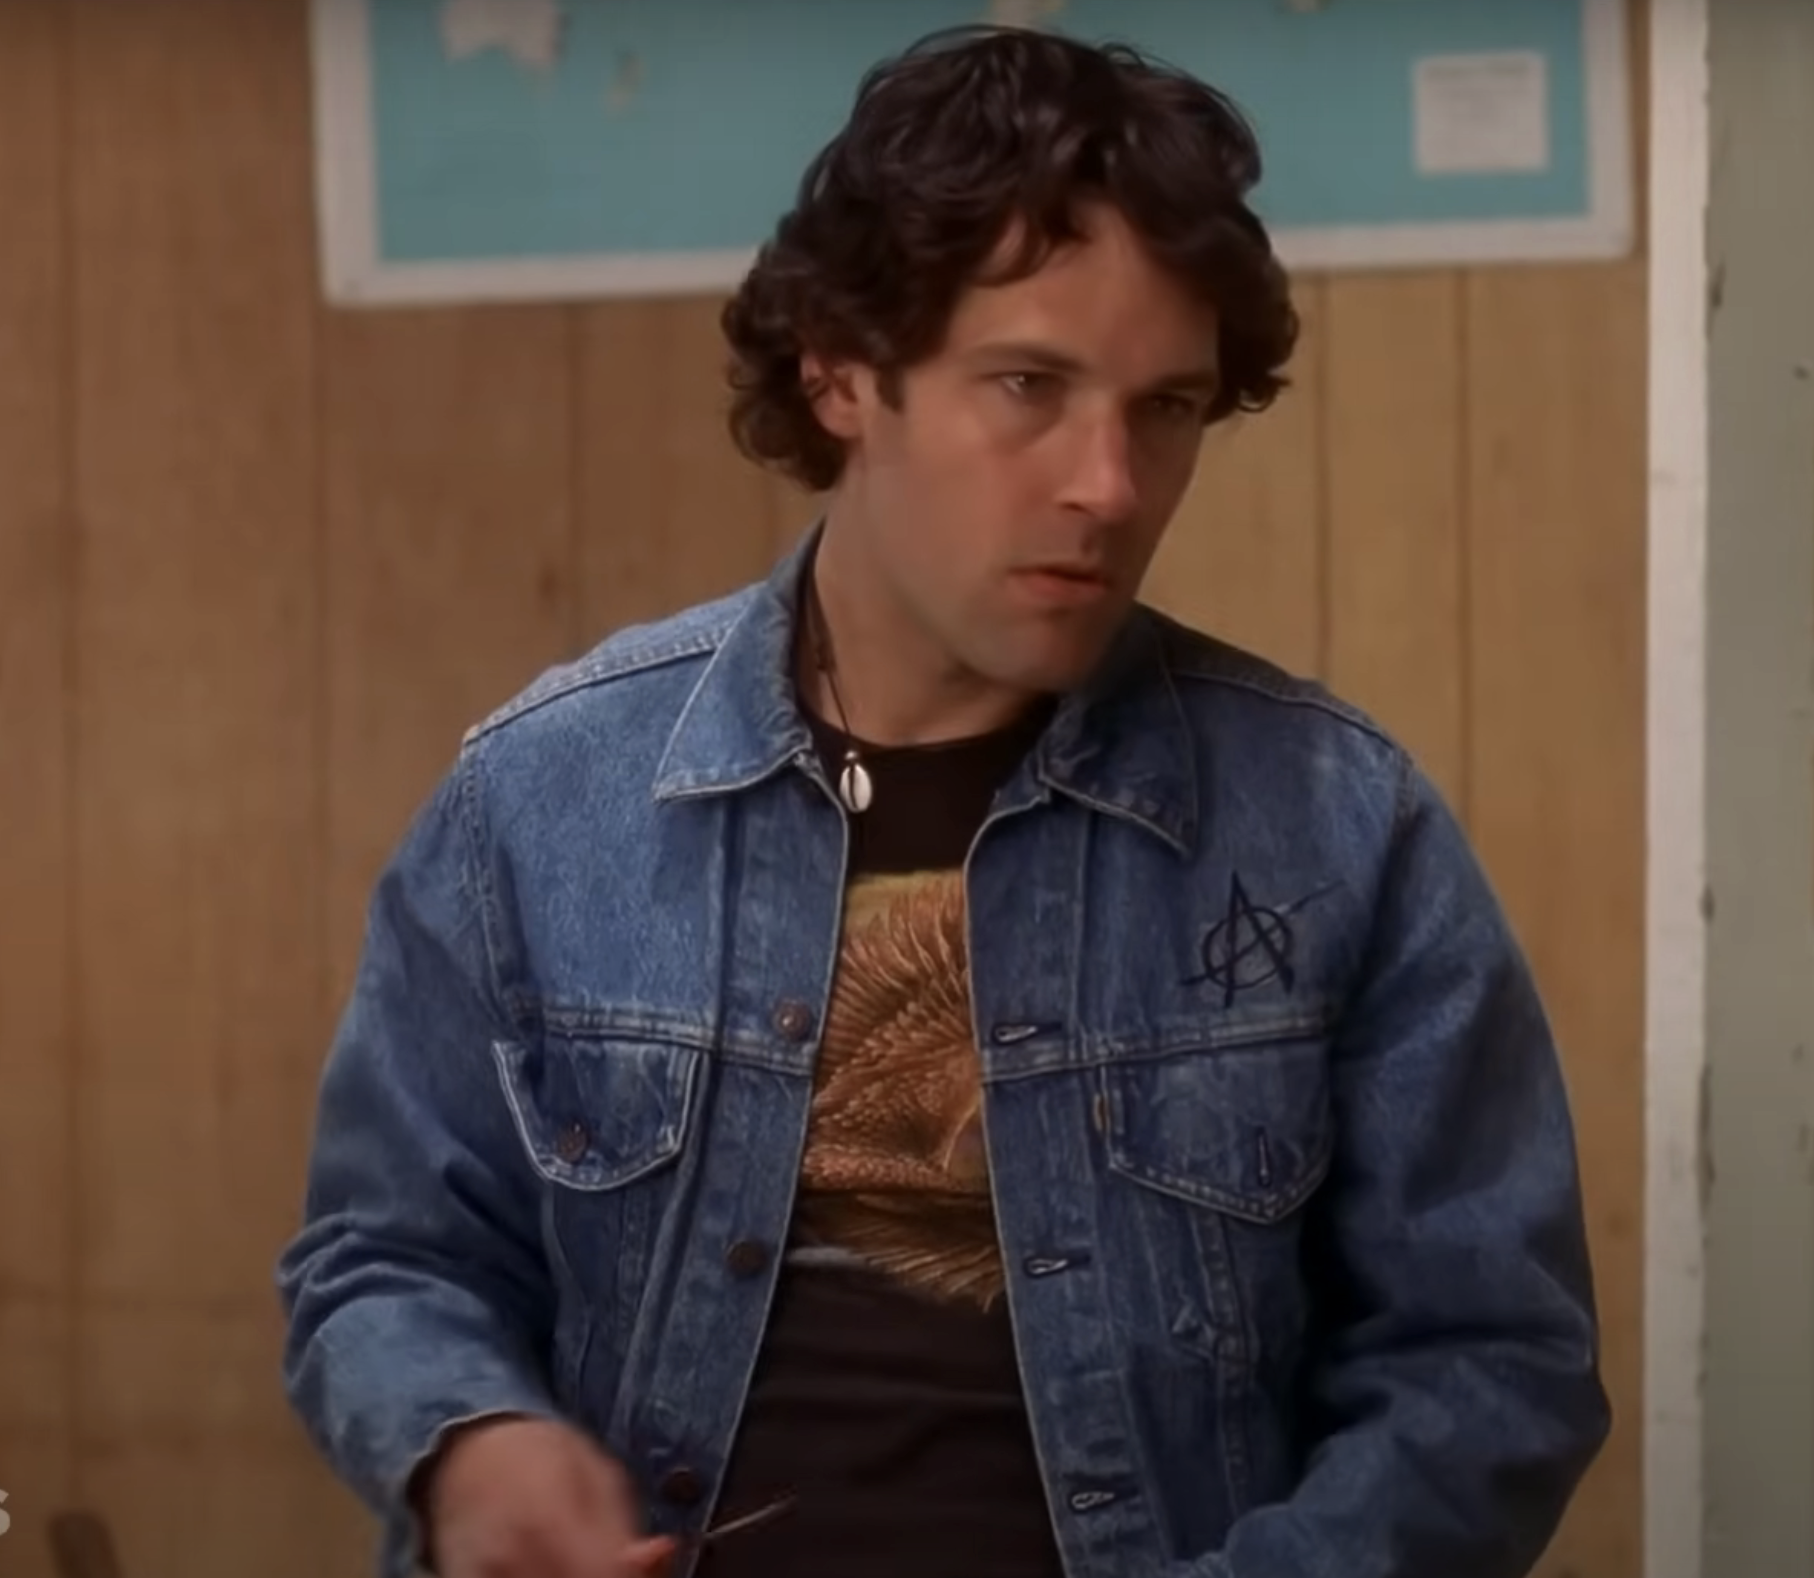 Andy in denim jacket over sweater, standing indoors, concerned expression